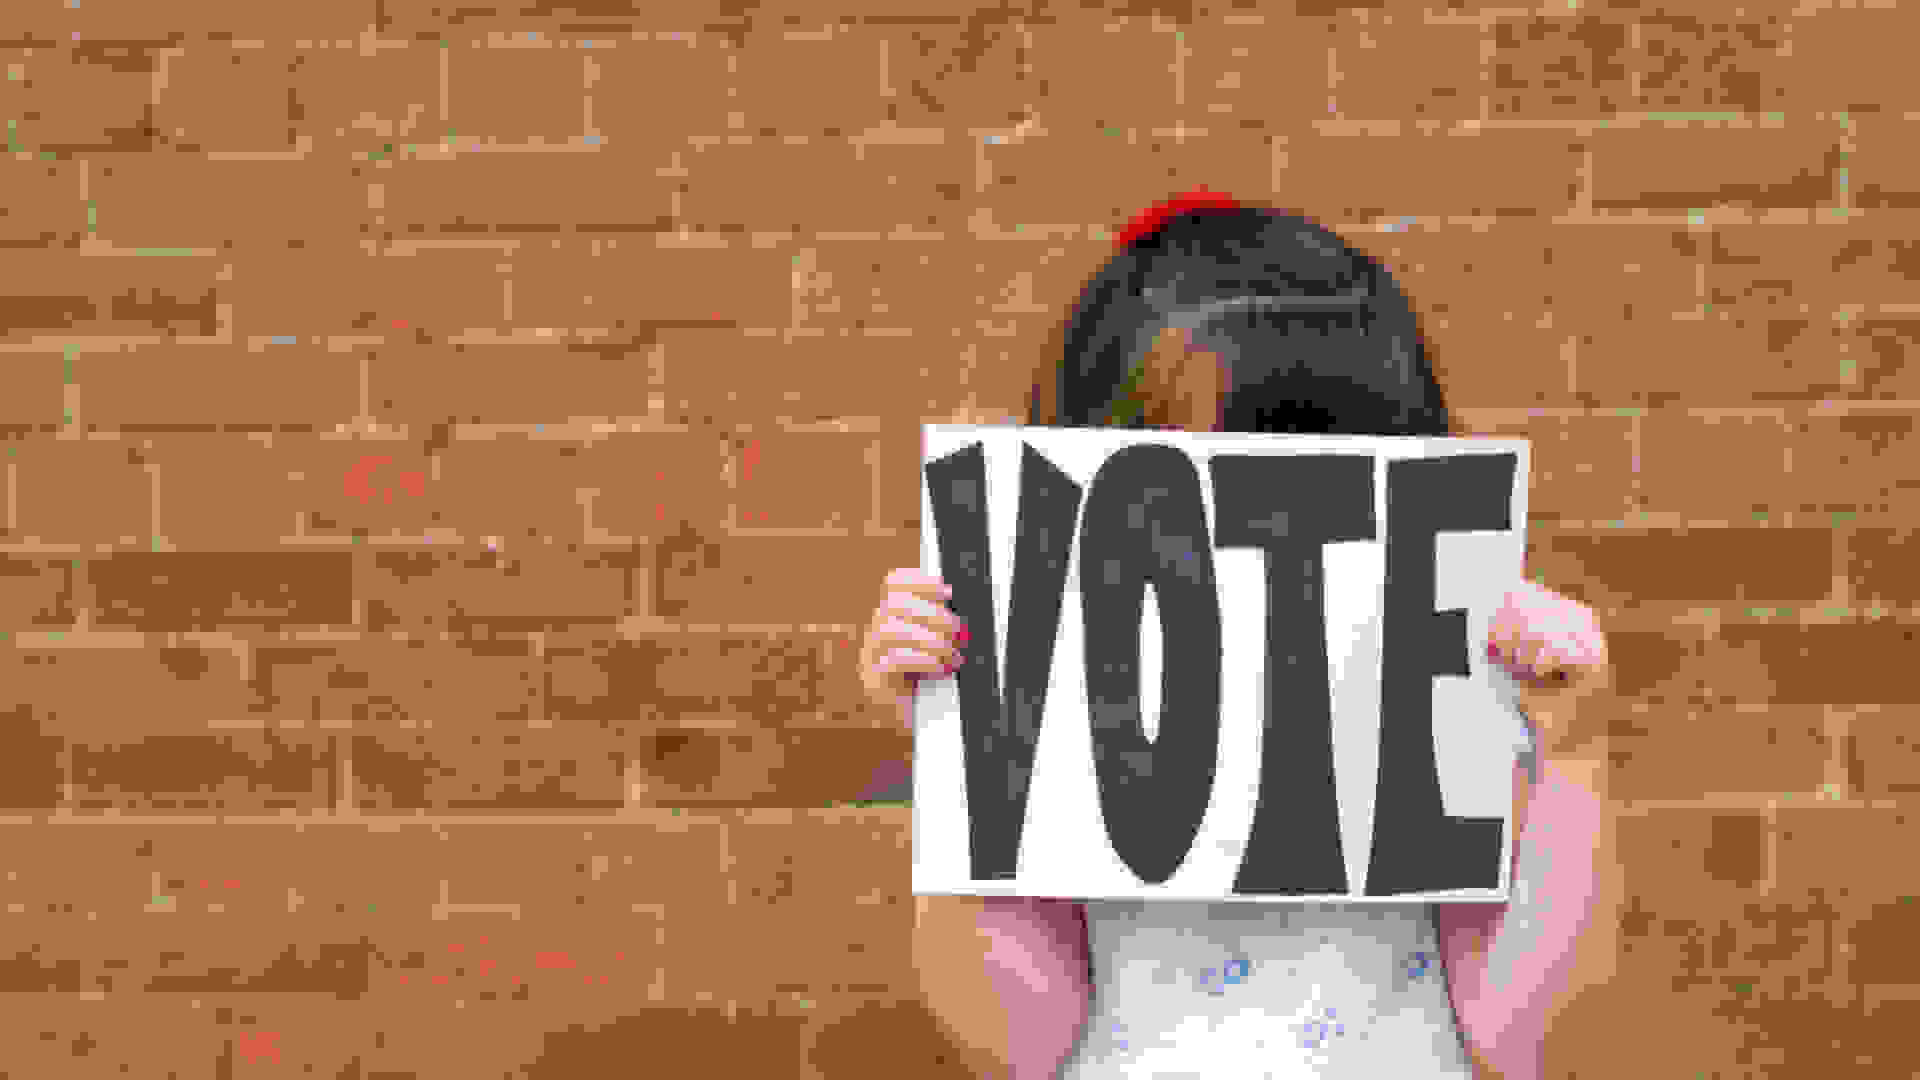 School child holding a 'Vote' sign